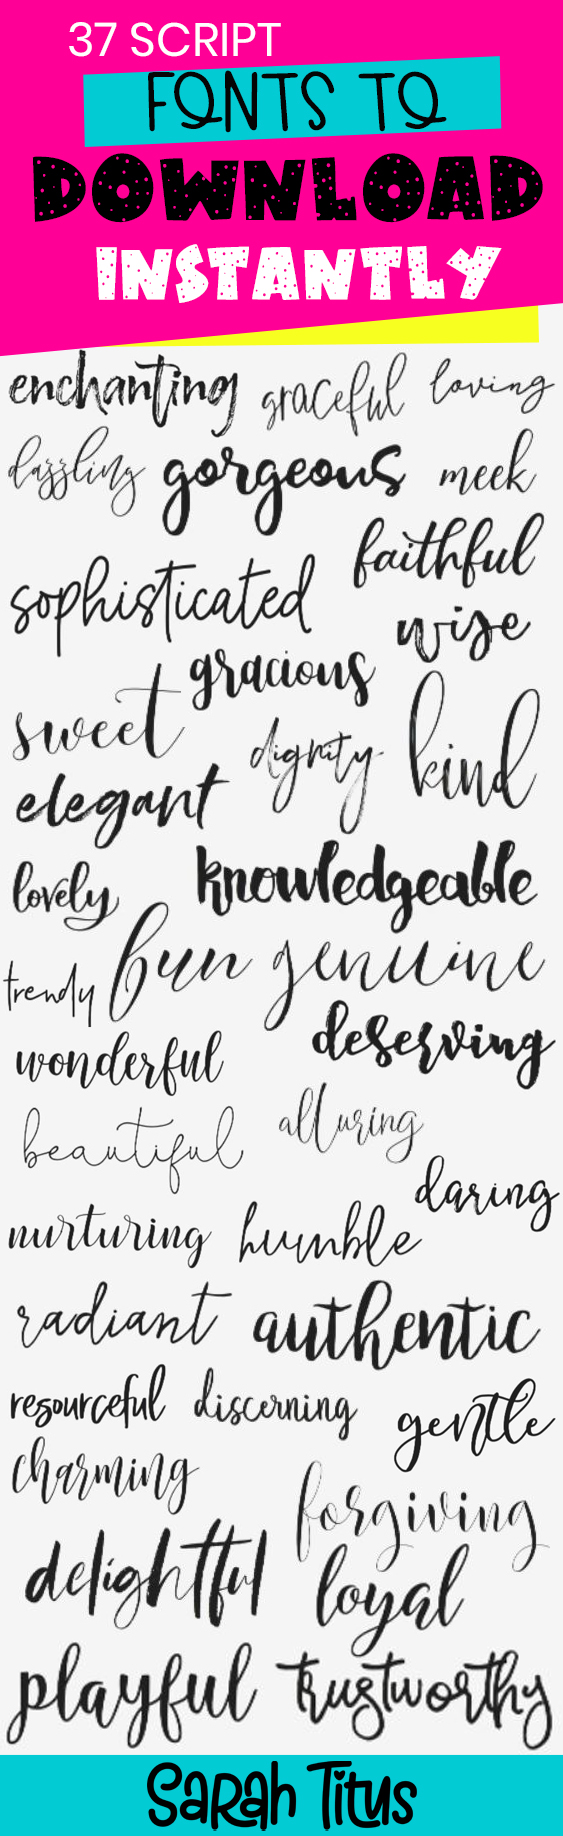 Be different and give your own personal touch to all your designs, photos, and posts with these absolutely beautiful 37 Script Fonts to Download Instantly! #fonts #bestfonts #scriptfonts #bloggingfonts #calligraphyfonts